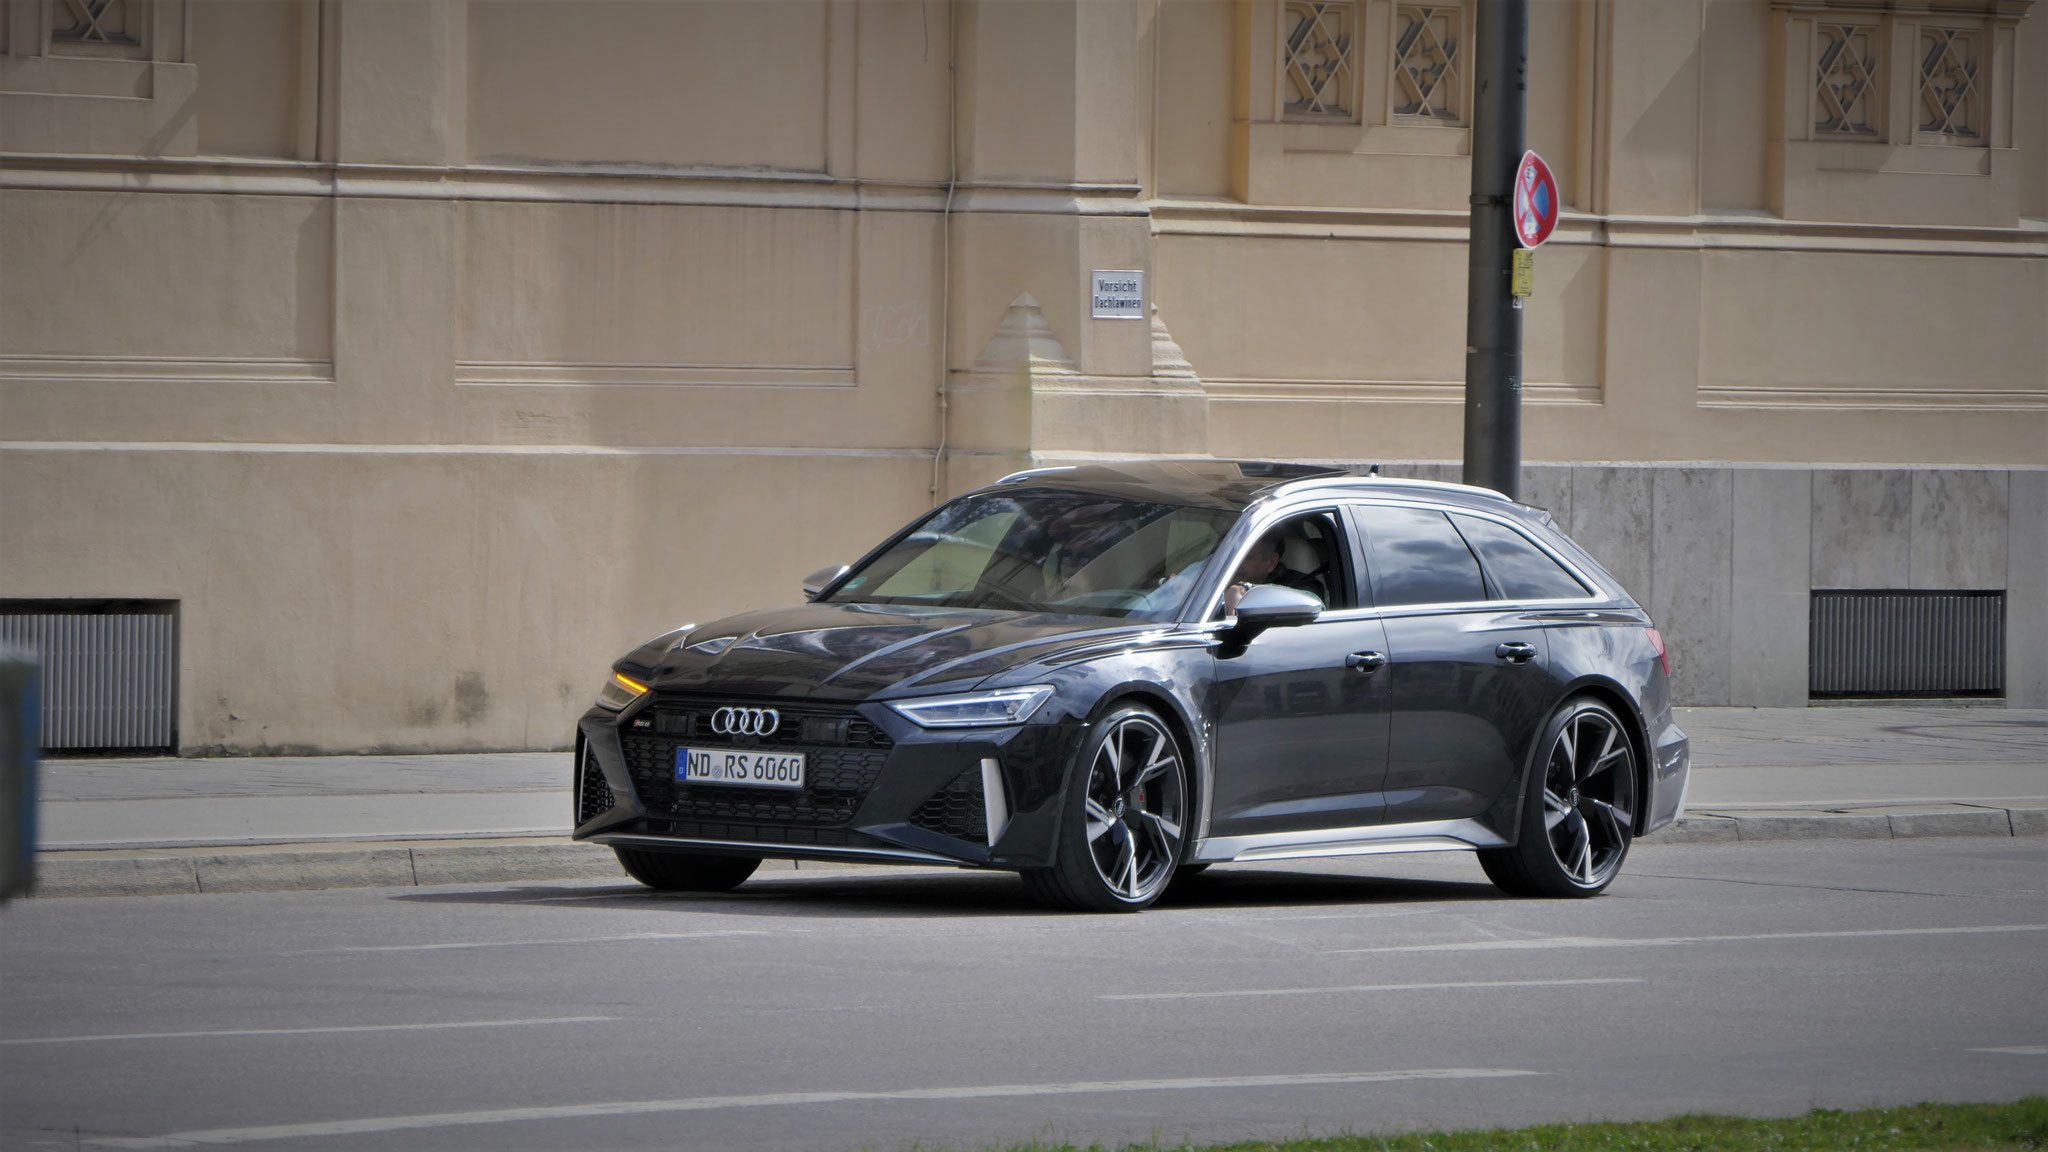 Audi RS6 - ND-RS6060